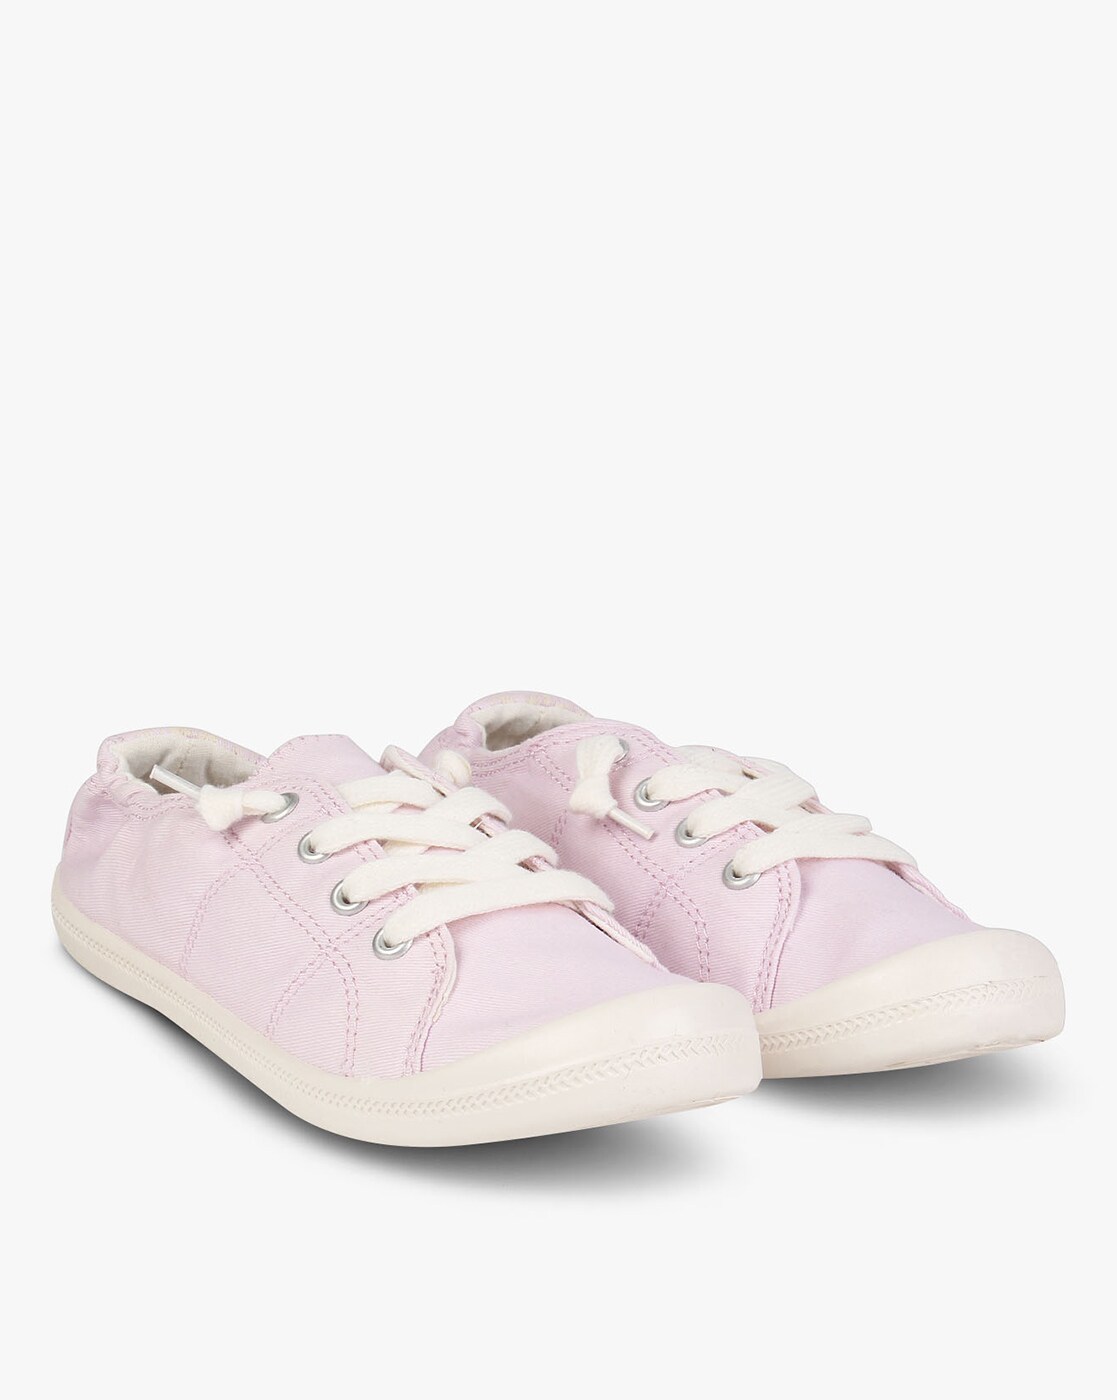 madden girl pink sneakers